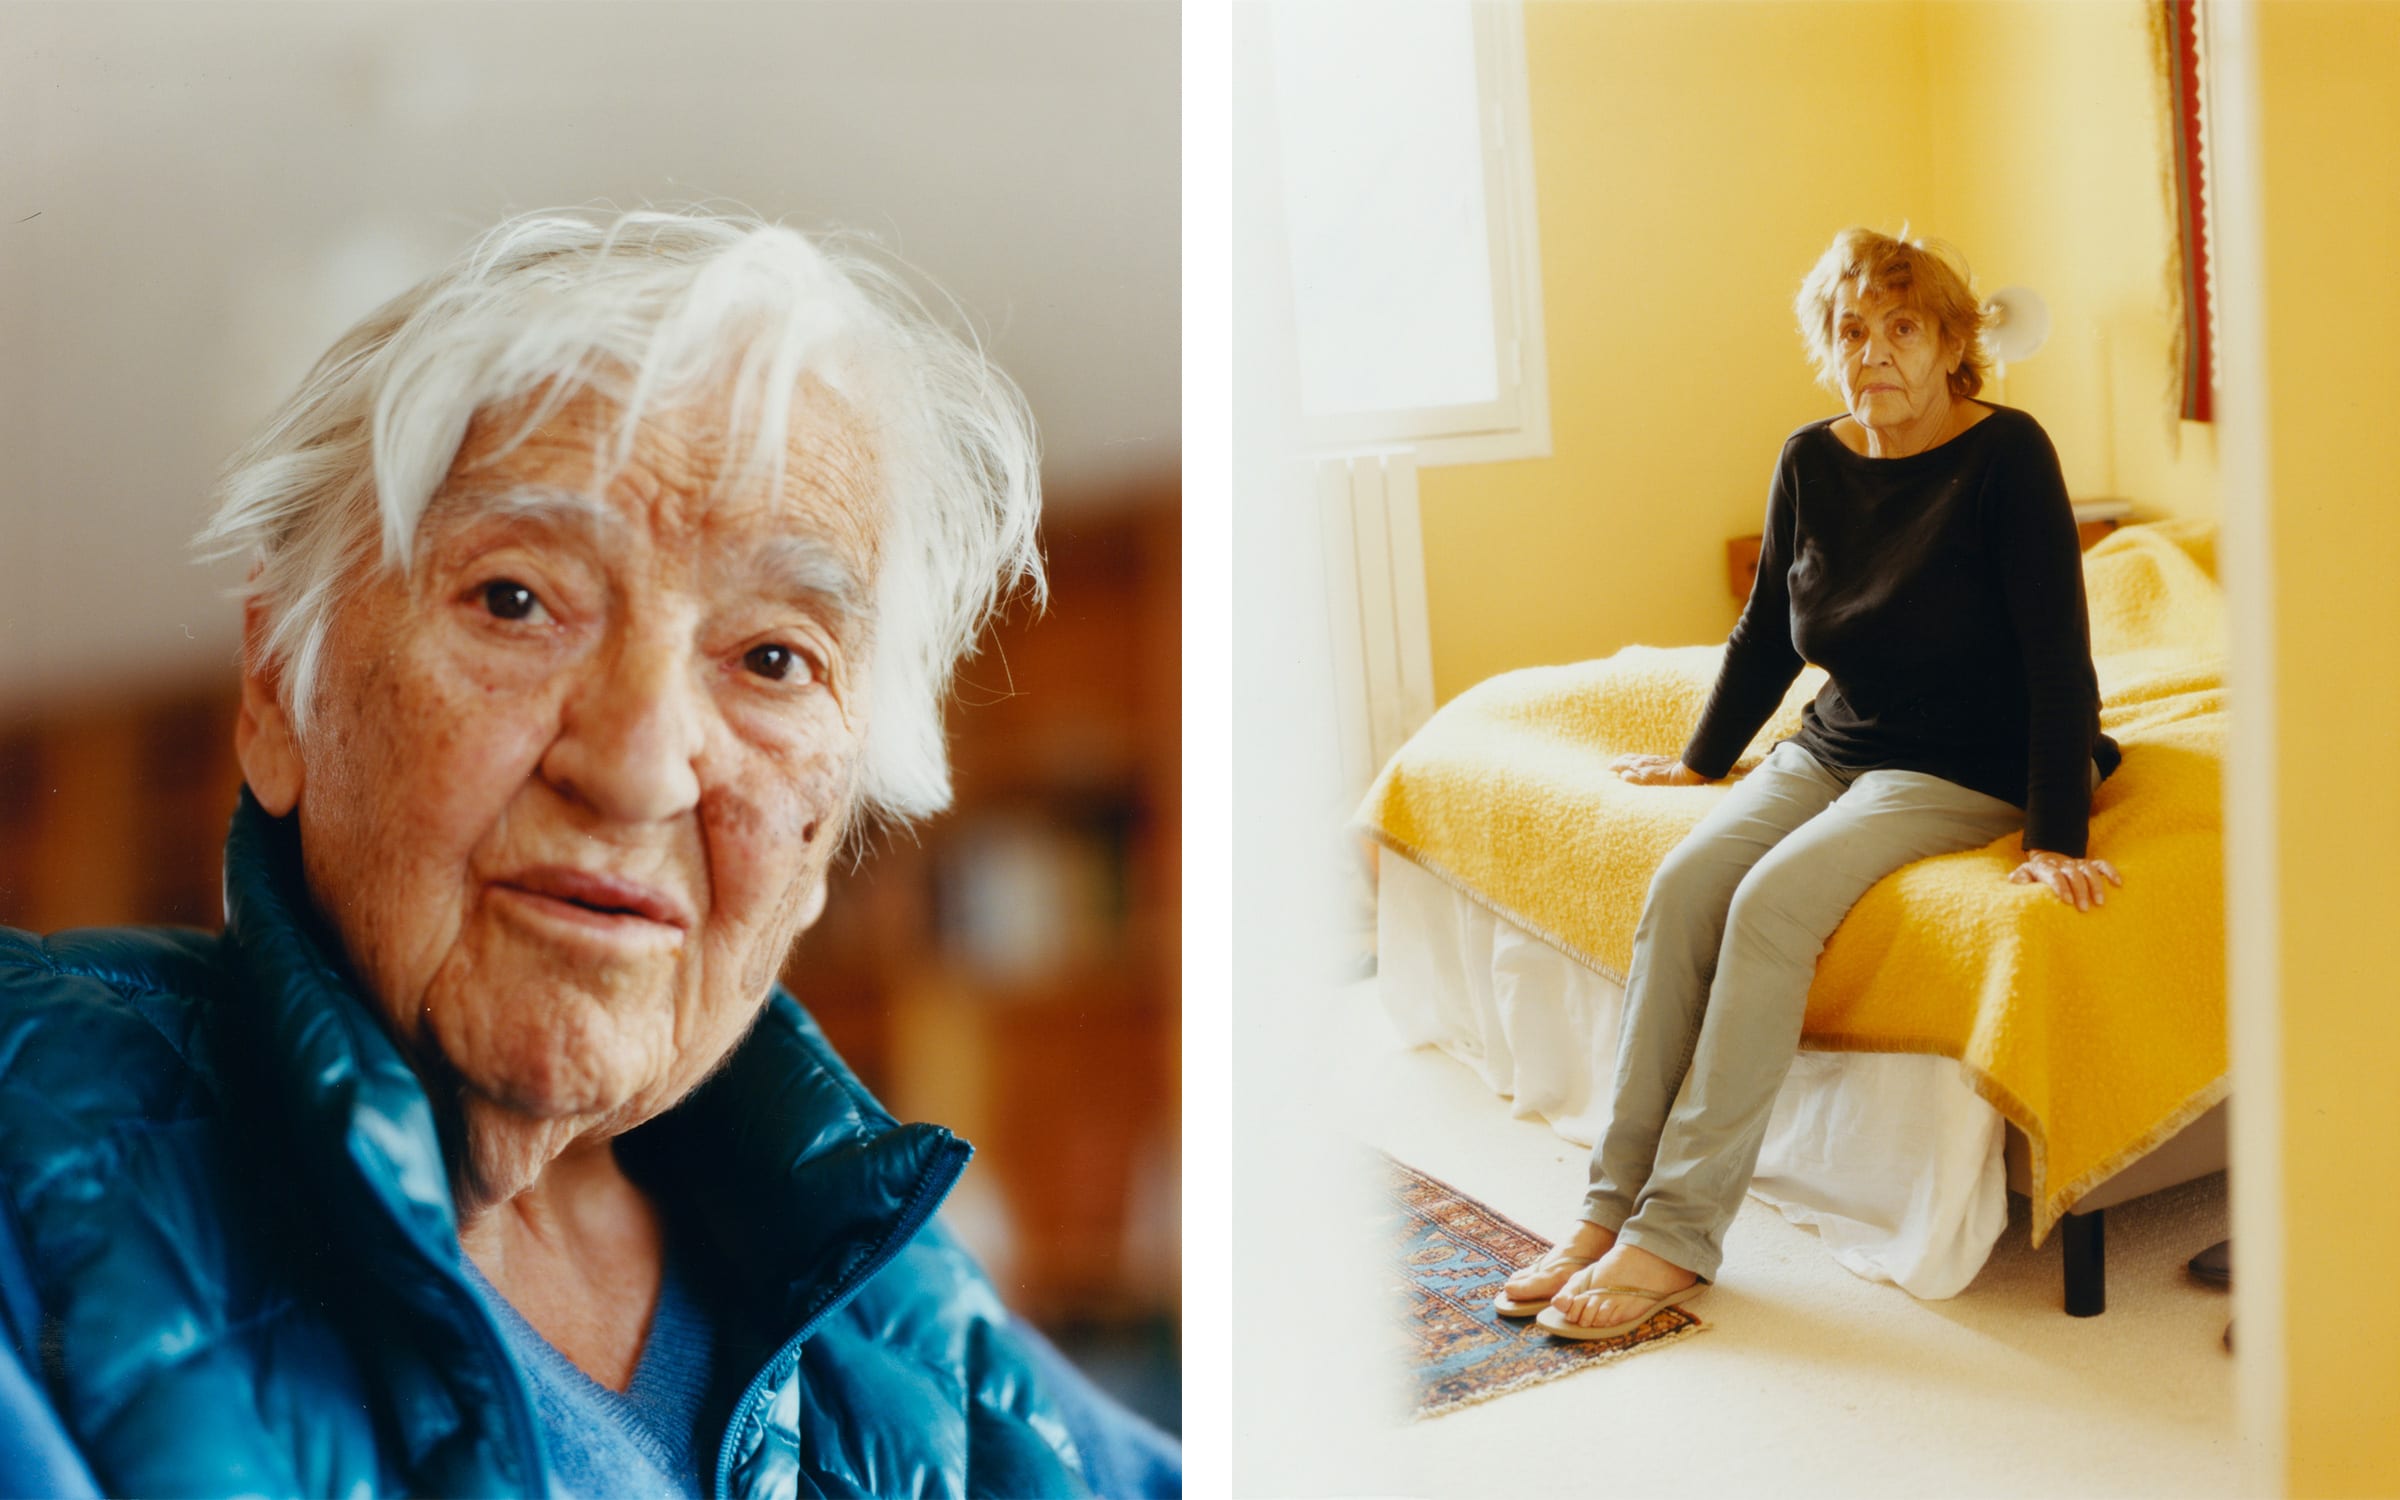 Etel Adnan and Simone Fattal, photographed at their home in the Bretagne, July 2021. Photo by Louis Canadas for Art Basel.